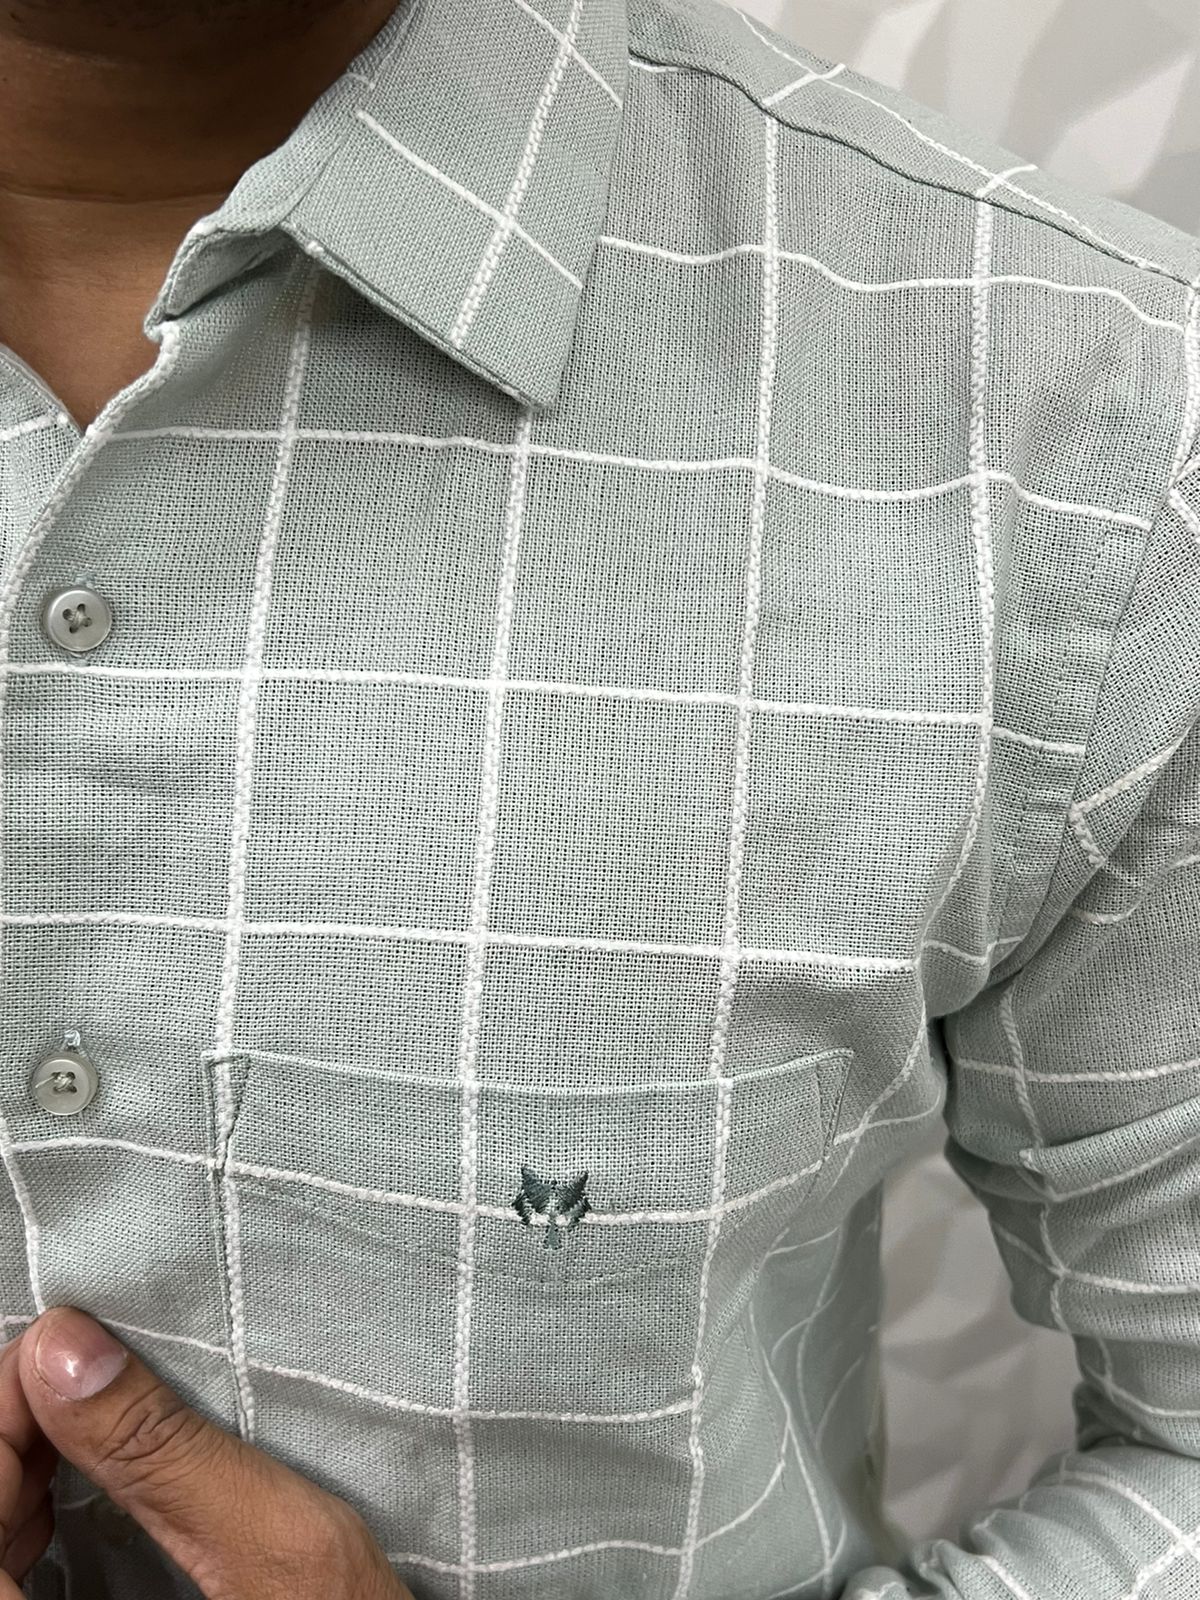 Jute fabric embroidery chex shirt